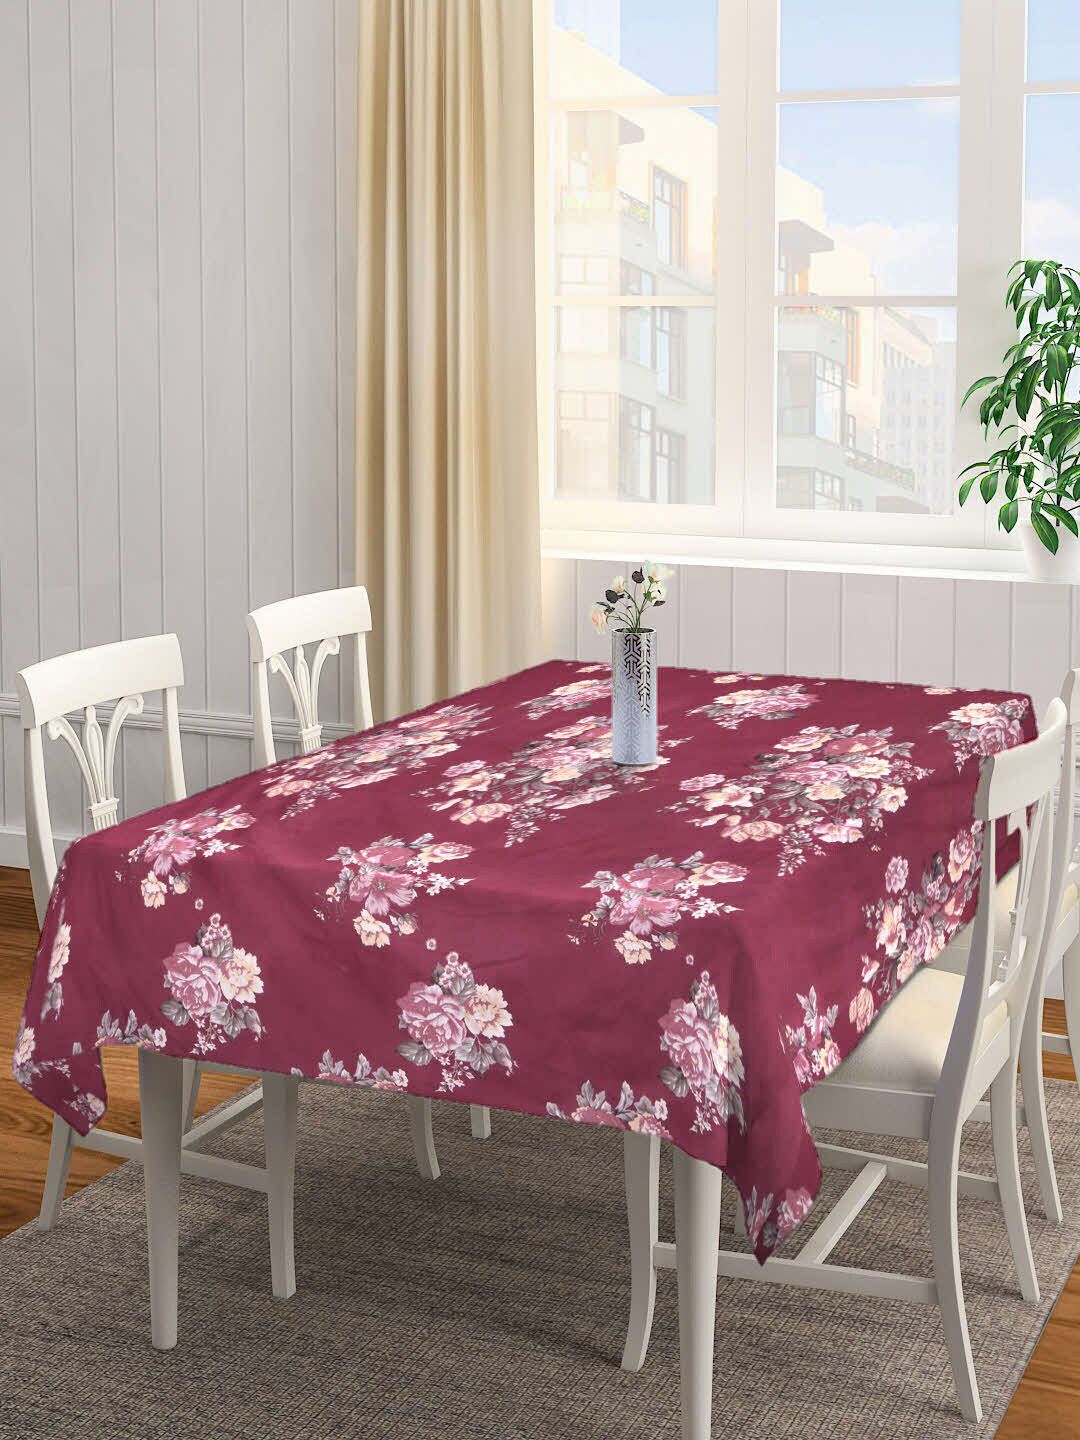 KLOTTHE 6 Seater Floral Printed Table Cover Price in India